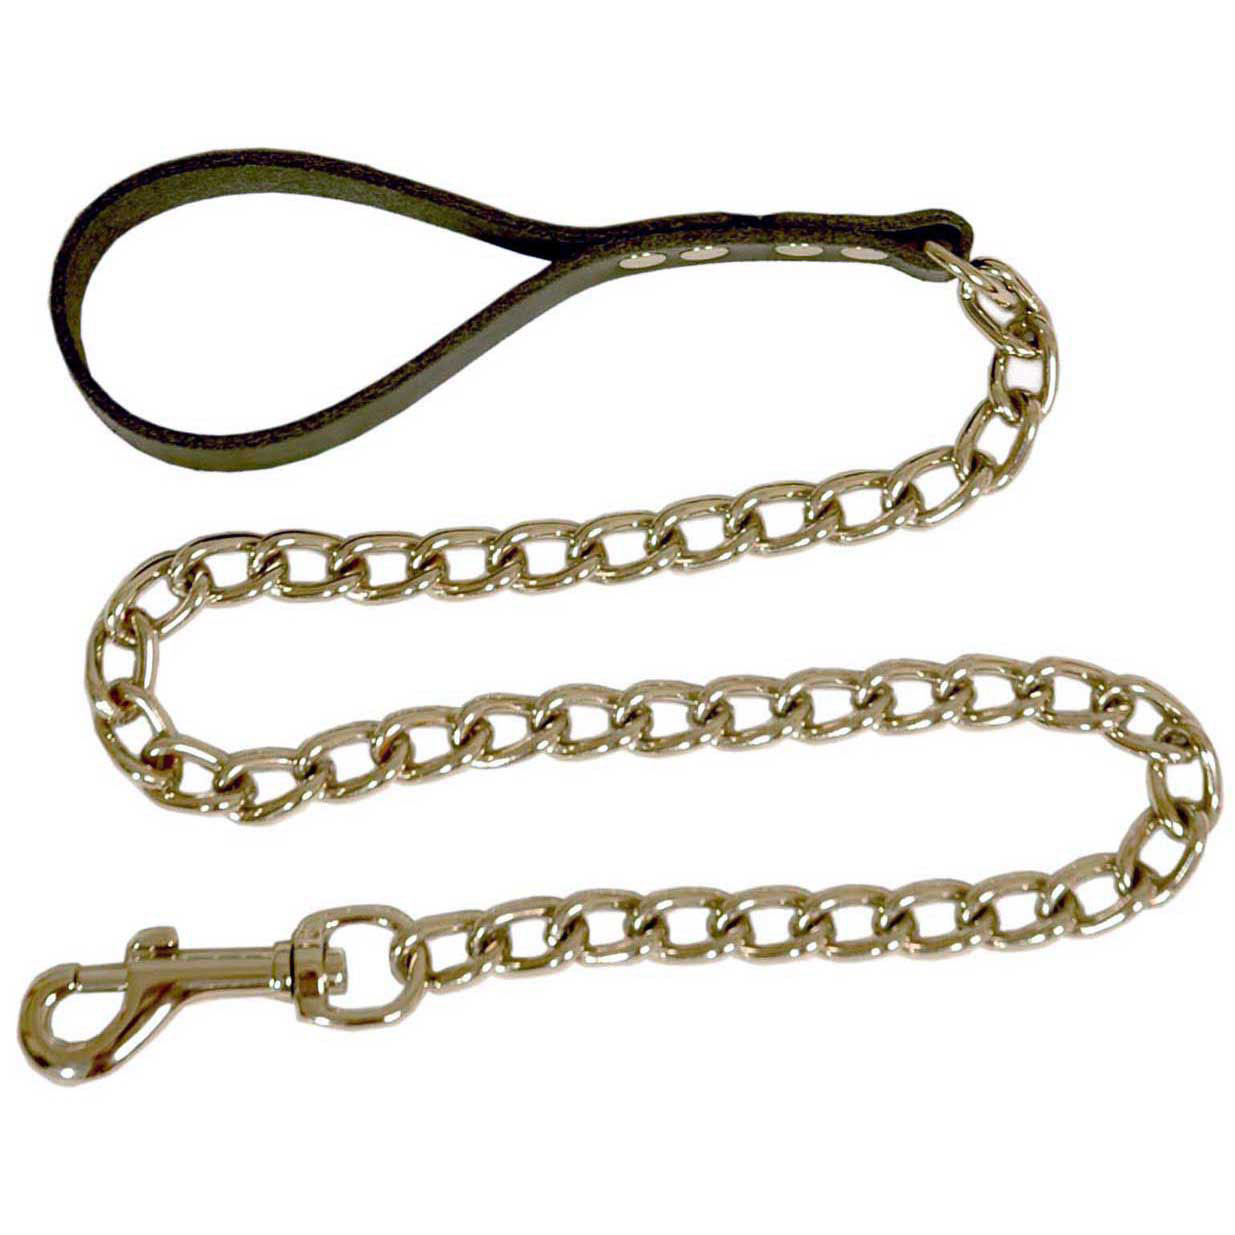 Chain Leash Affordable Leather Products